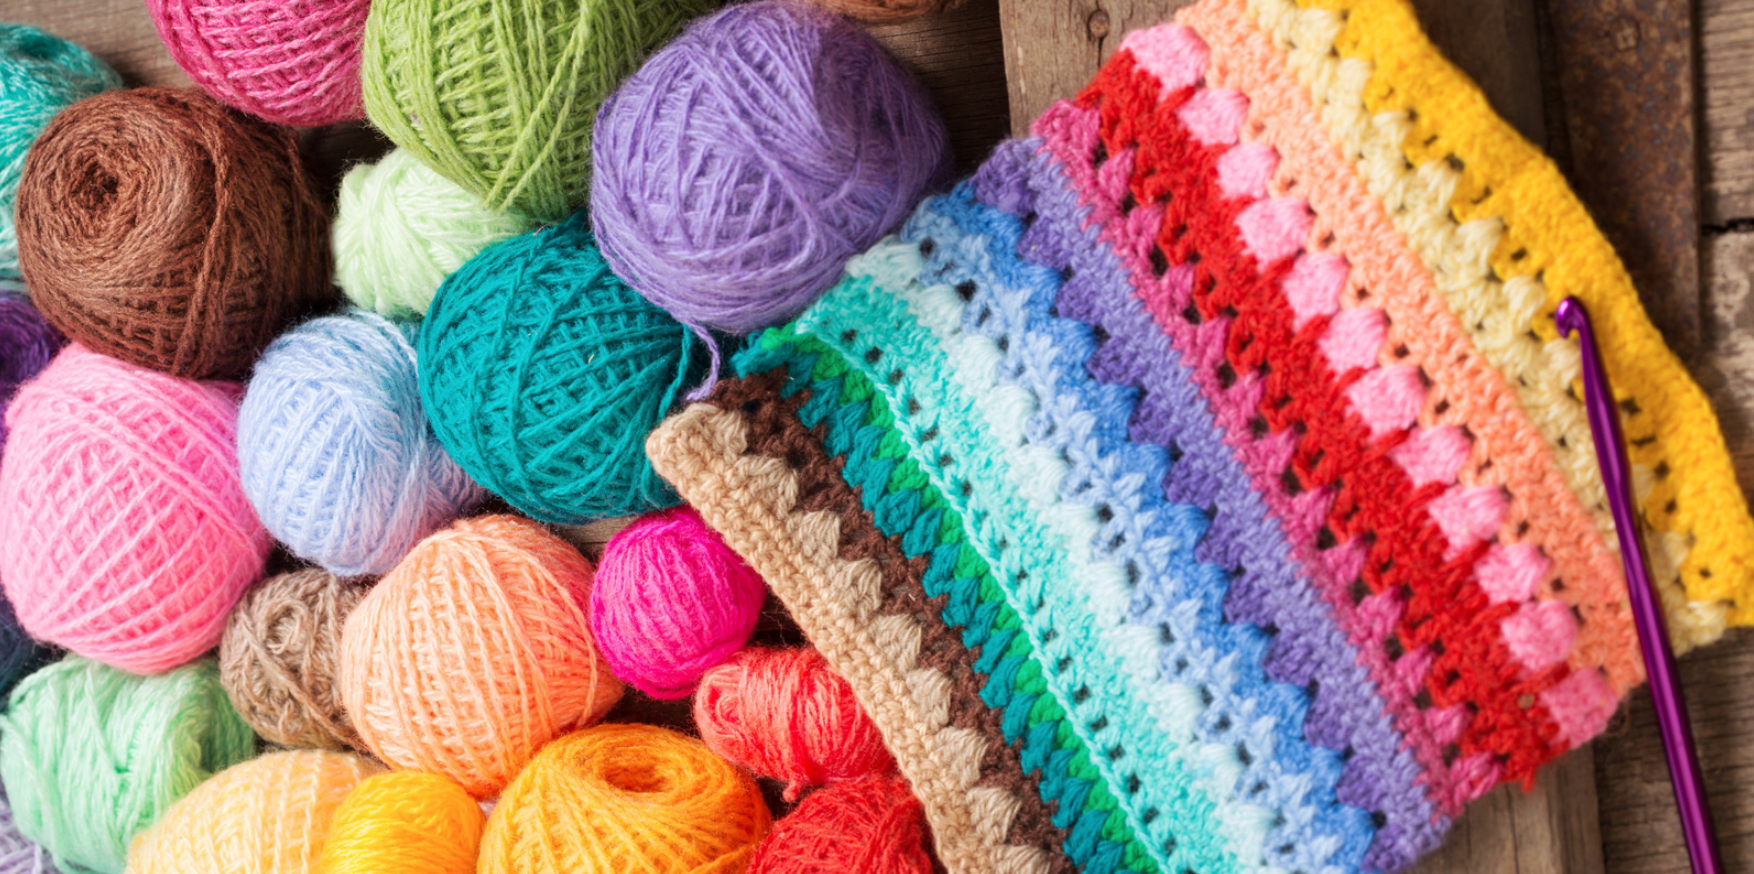 A colourful display of knitted yarn